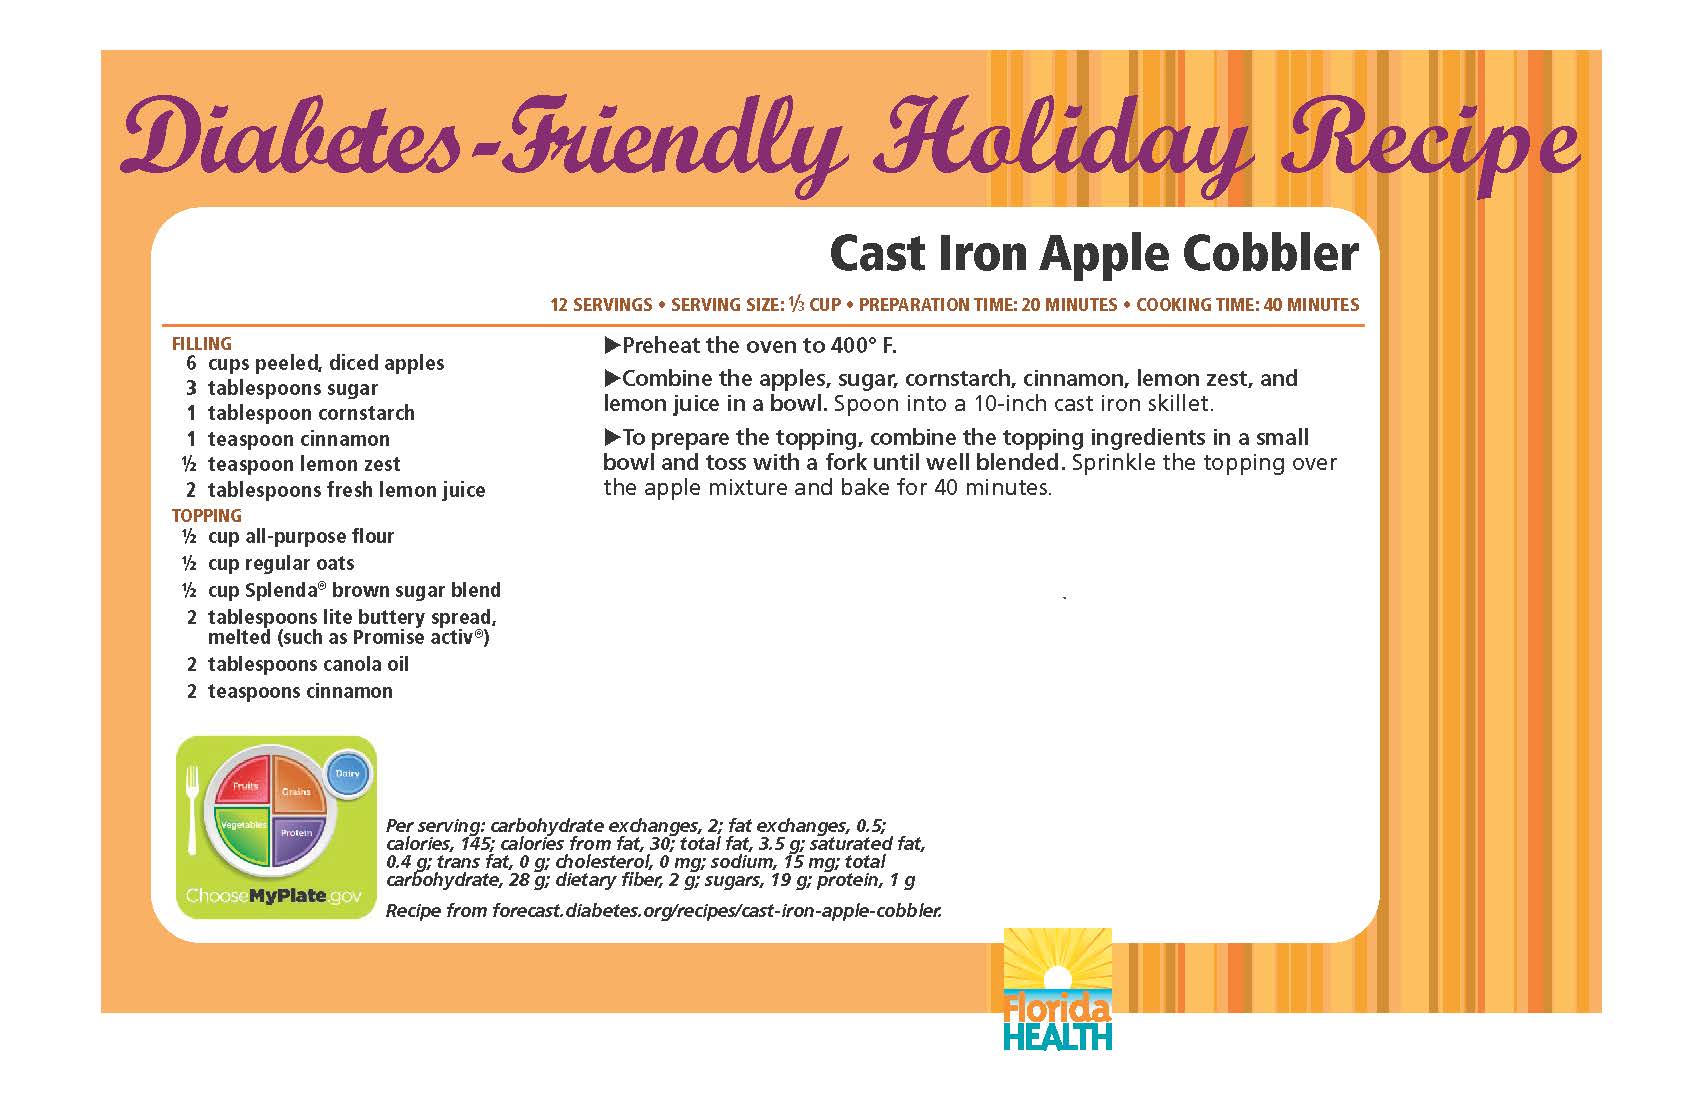 Diabetes-Friendly Holiday Recipe Cast Iron Apple Cobbler 12 servings • serving size: 1⁄3 cup • preparation time: 20 minutes • cooking time: 40 minutes Filling 6 cups peeled, diced apples 3 tablespoons sugar 1 tablespoon cornstarch 1 teaspoon cinnamon ½ teaspoon lemon zest 2 tablespoons fresh lemon juice topping ½ cup all-purpose flour ½ cup regular oats ½ cup splenda® brown sugar blend 2 tablespoons lite buttery spread, melted (such as promise activ®) 2 tablespoons canola oil 2 teaspoons cinnamon Cast Iron Apple Cobbler 12 servings • serving size: 1⁄3 cup • preparation time: 20 minutes • cooking time: 40 minutes Preheat the oven to 400° F. Combine the apples, sugar, cornstarch, cinnamon, lemon zest, and lemon juice in a bowl. Spoon into a 10-inch cast iron skillet. To prepare the topping, combine the topping ingredients in a small bowl and toss with a fork until well blended. Sprinkle the topping over the apple mixture and bake for 40 minutes. Per serving: carbohydrate exchanges, 2; fat exchanges, 0.5; calories, 145; calories from fat, 30; total fat, 3.5 g; saturated fat, 0.4 g; trans fat, 0 g; cholesterol, 0 mg; sodium, 15 mg; total carbohydrate, 28 g; dietary fiber, 2 g; sugars, 19 g; protein, 1 g Recipe from forecast.diabetes.org/recipes/cast-iron-apple-cobbler.